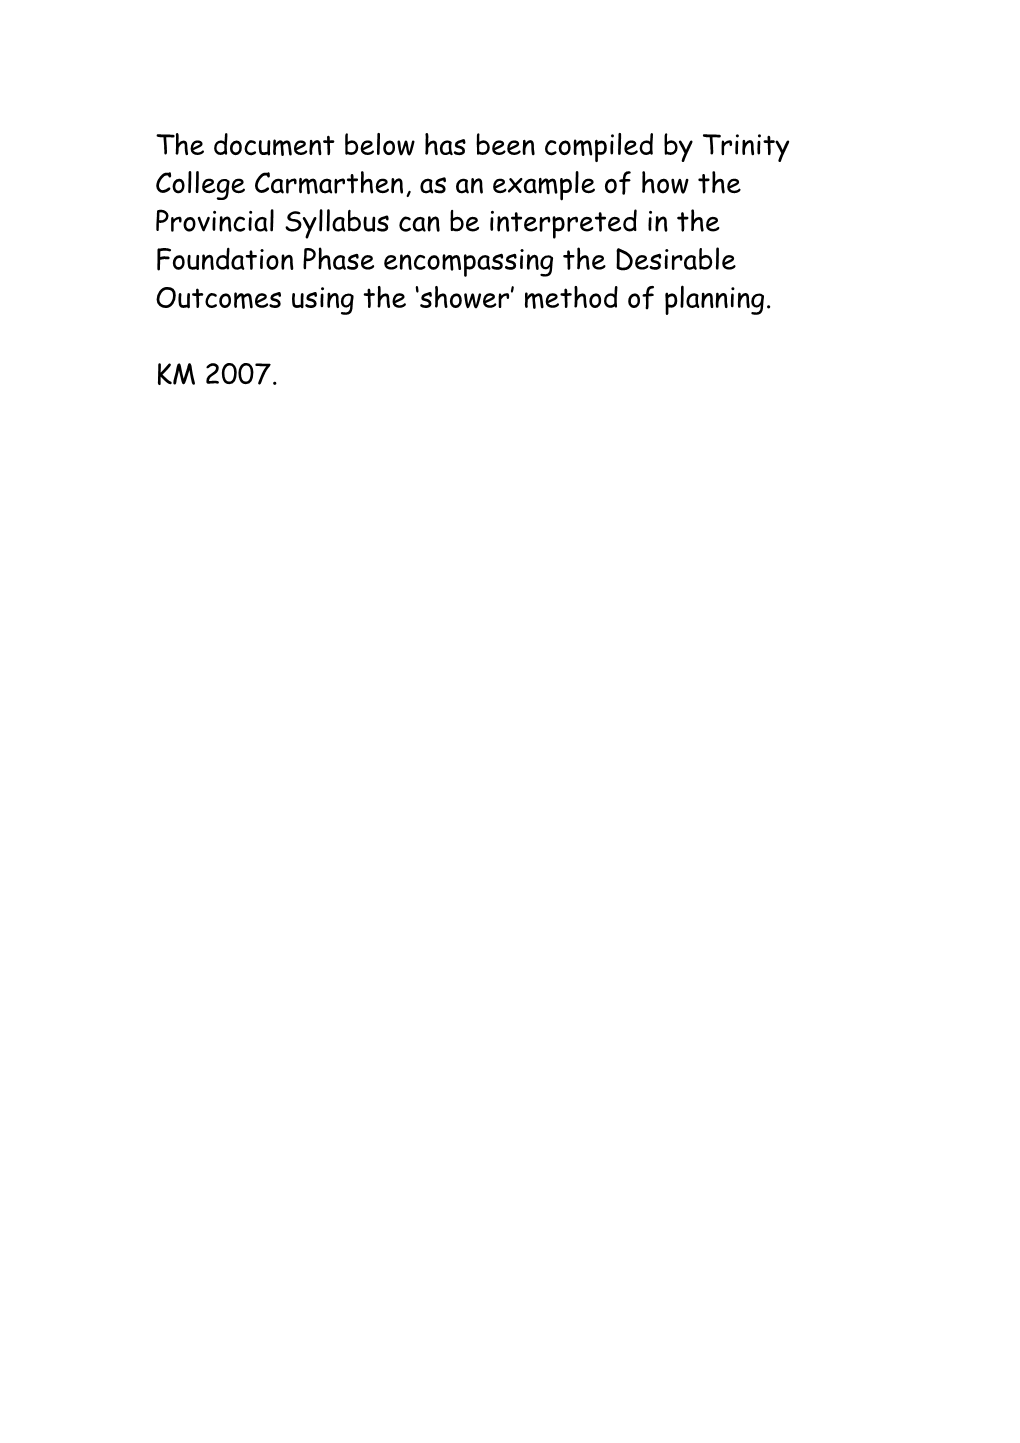 The Proposed Implementation of the Foundation Phase Is As Follows: September 2008 3-5Yrs